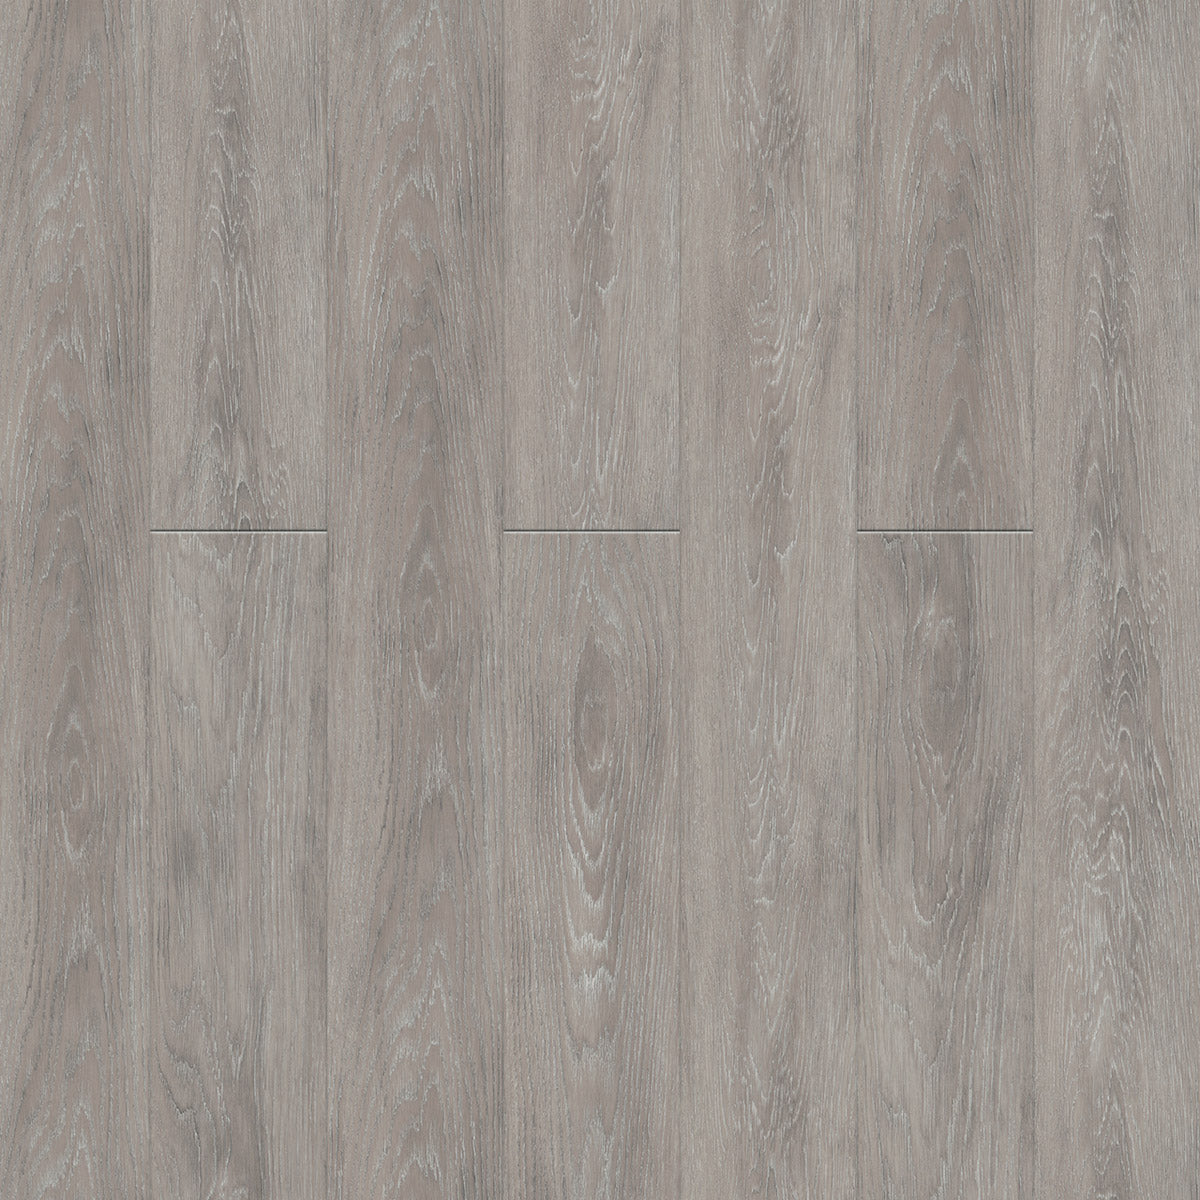 Engineered Floors - Gallatin Collection - 7 in. x 48 in. - Driftwood